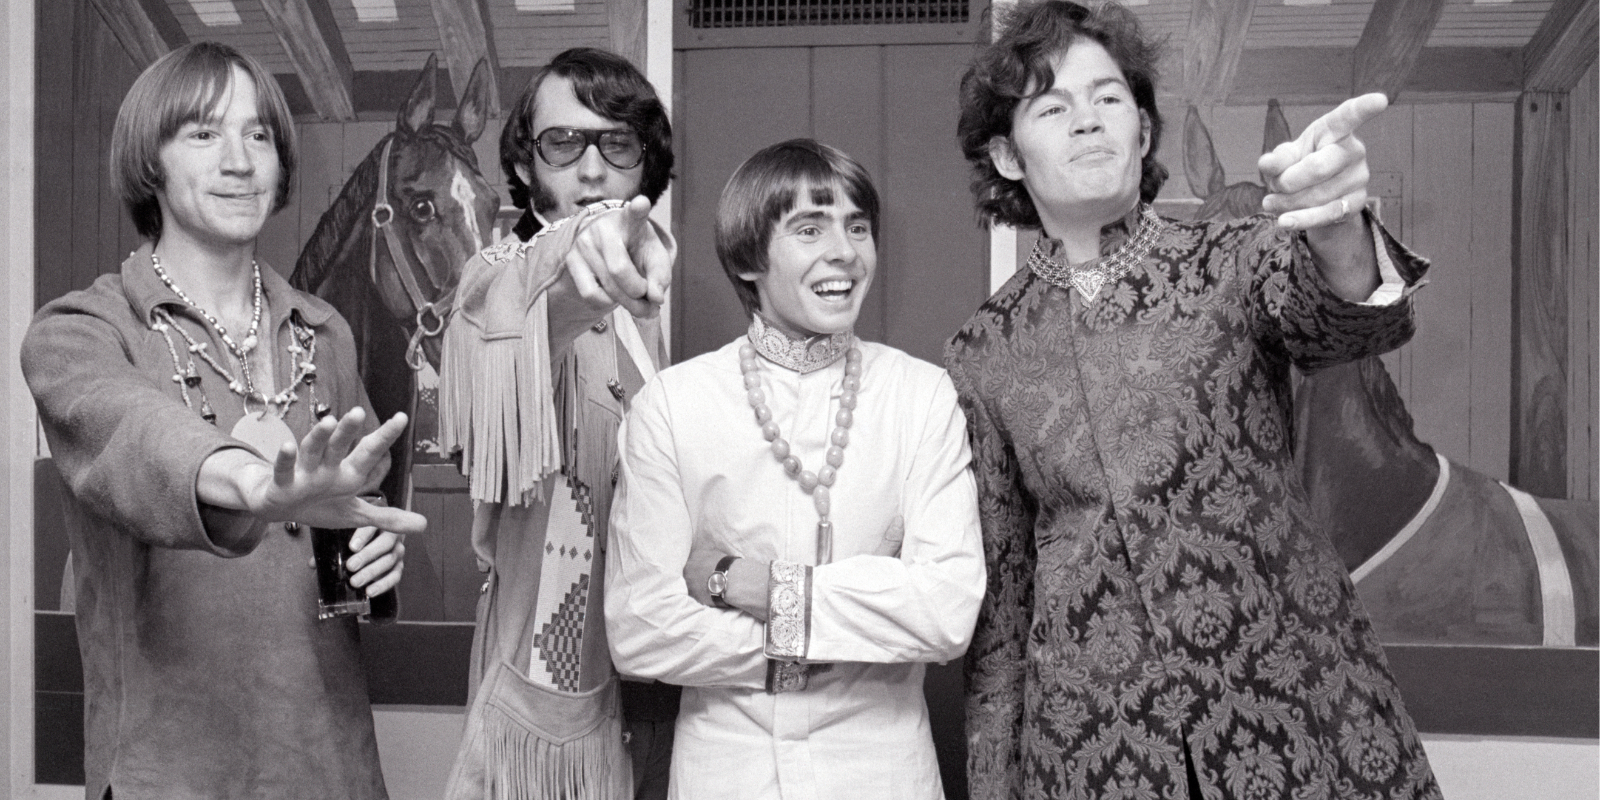 Peter Tork, Mike Nesmith, Davy Jones and Micky Dolenz starred in the television series The Monkees and recorded an episode of the second season in Paris in 1967.